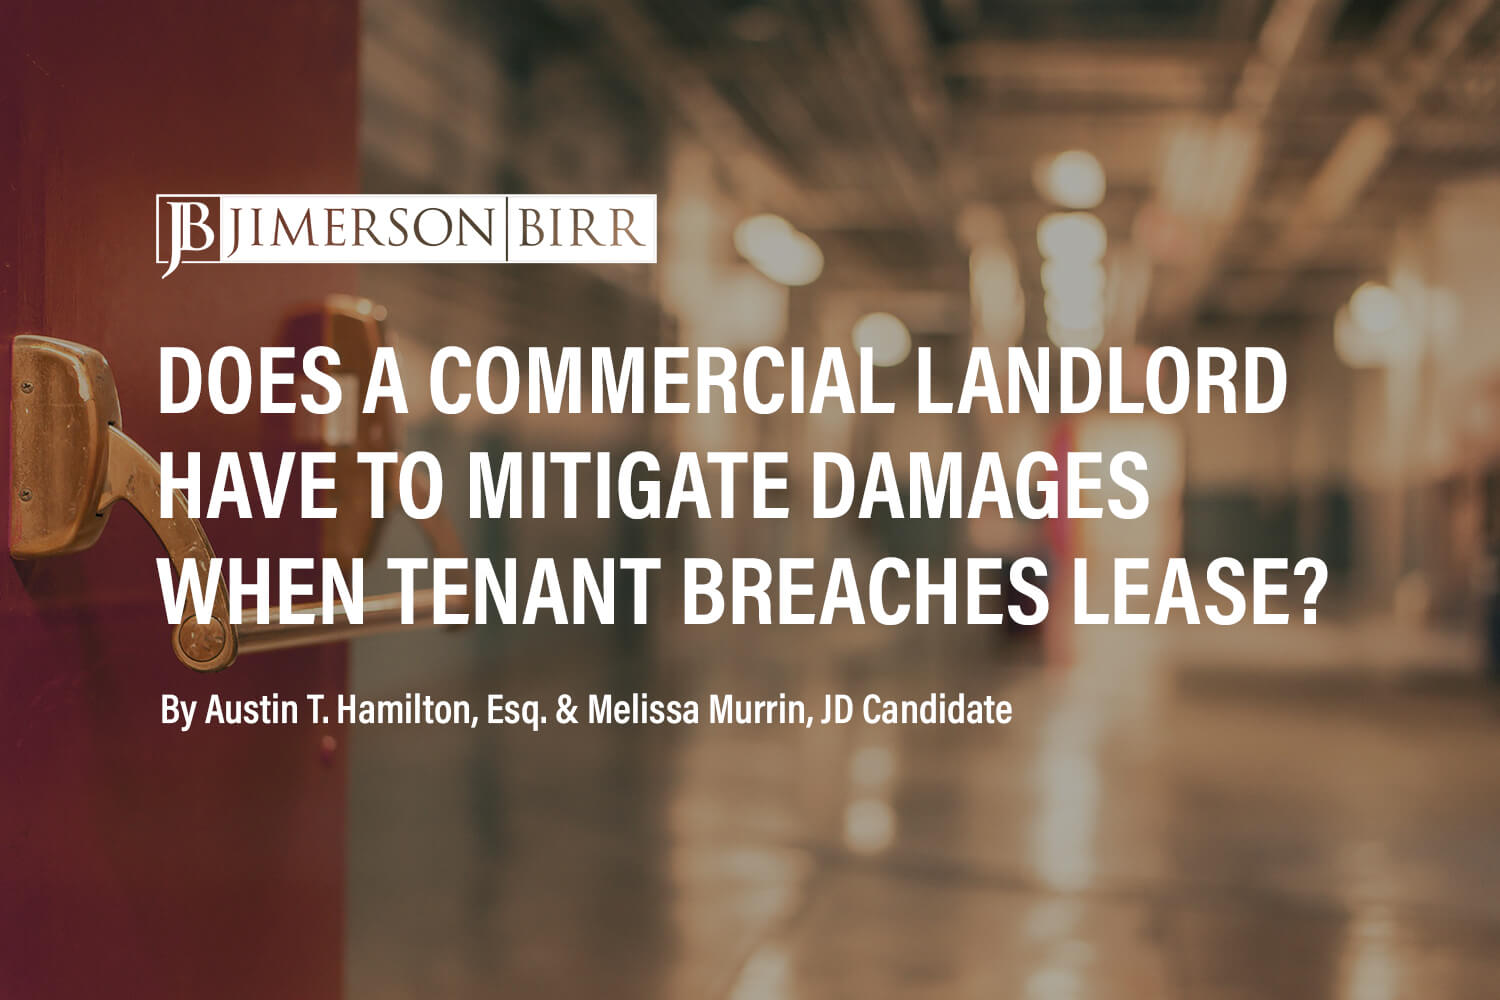 Does a Commercial Landlord Have a Duty to Mitigate Damages After a Tenant Breaches the Lease Agreement?